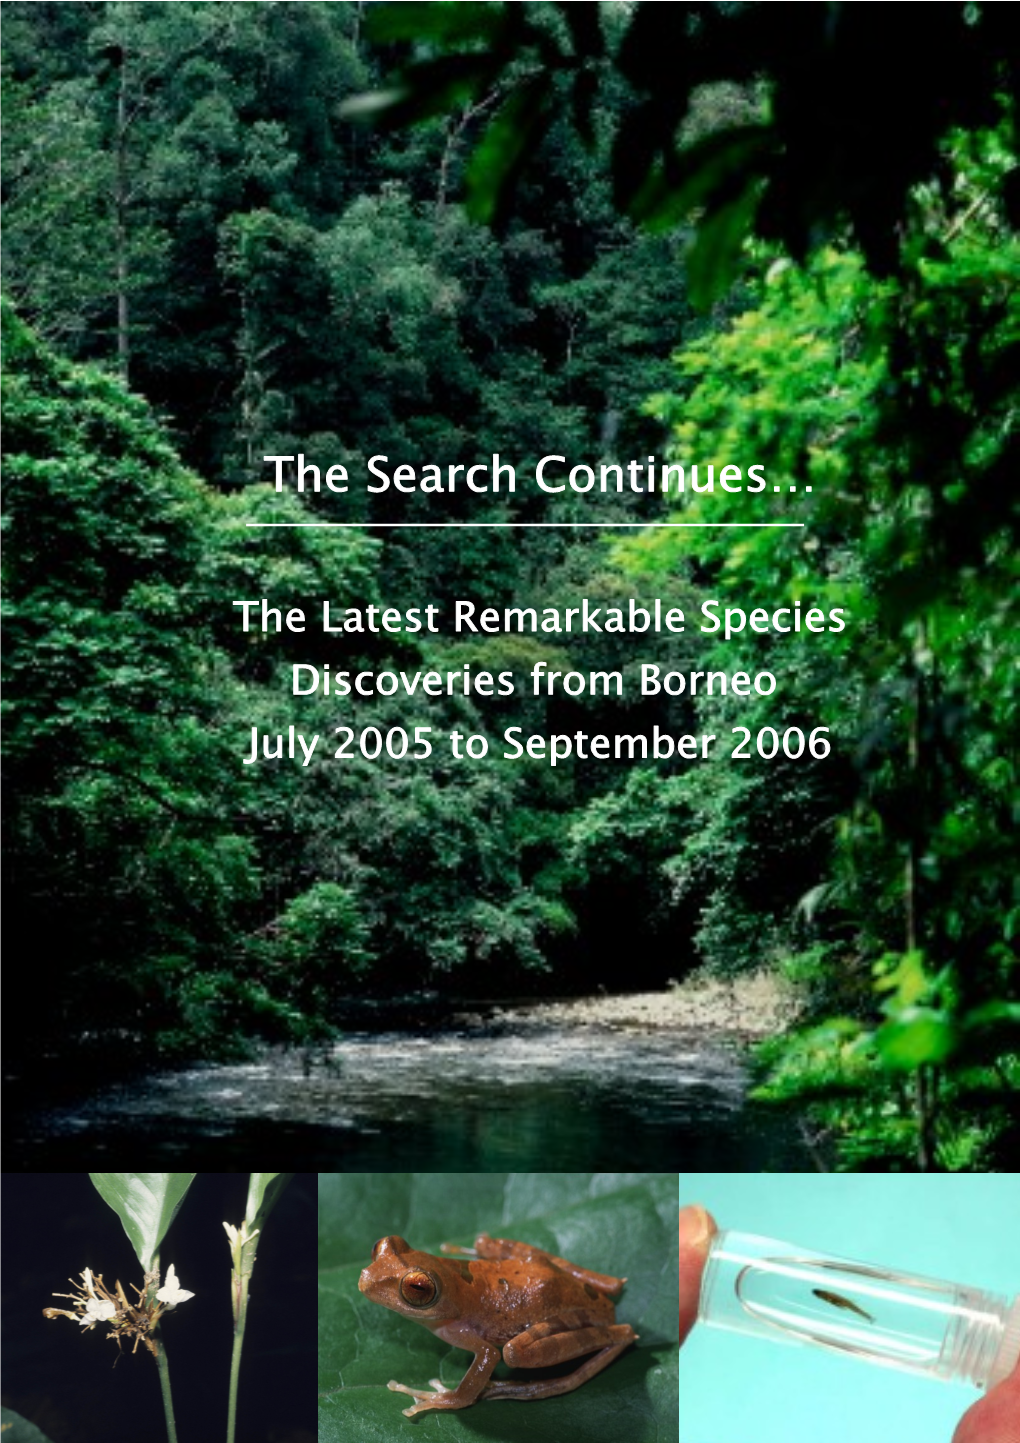 Borneo Uncovered/Exposed(Needs Snappy Title)